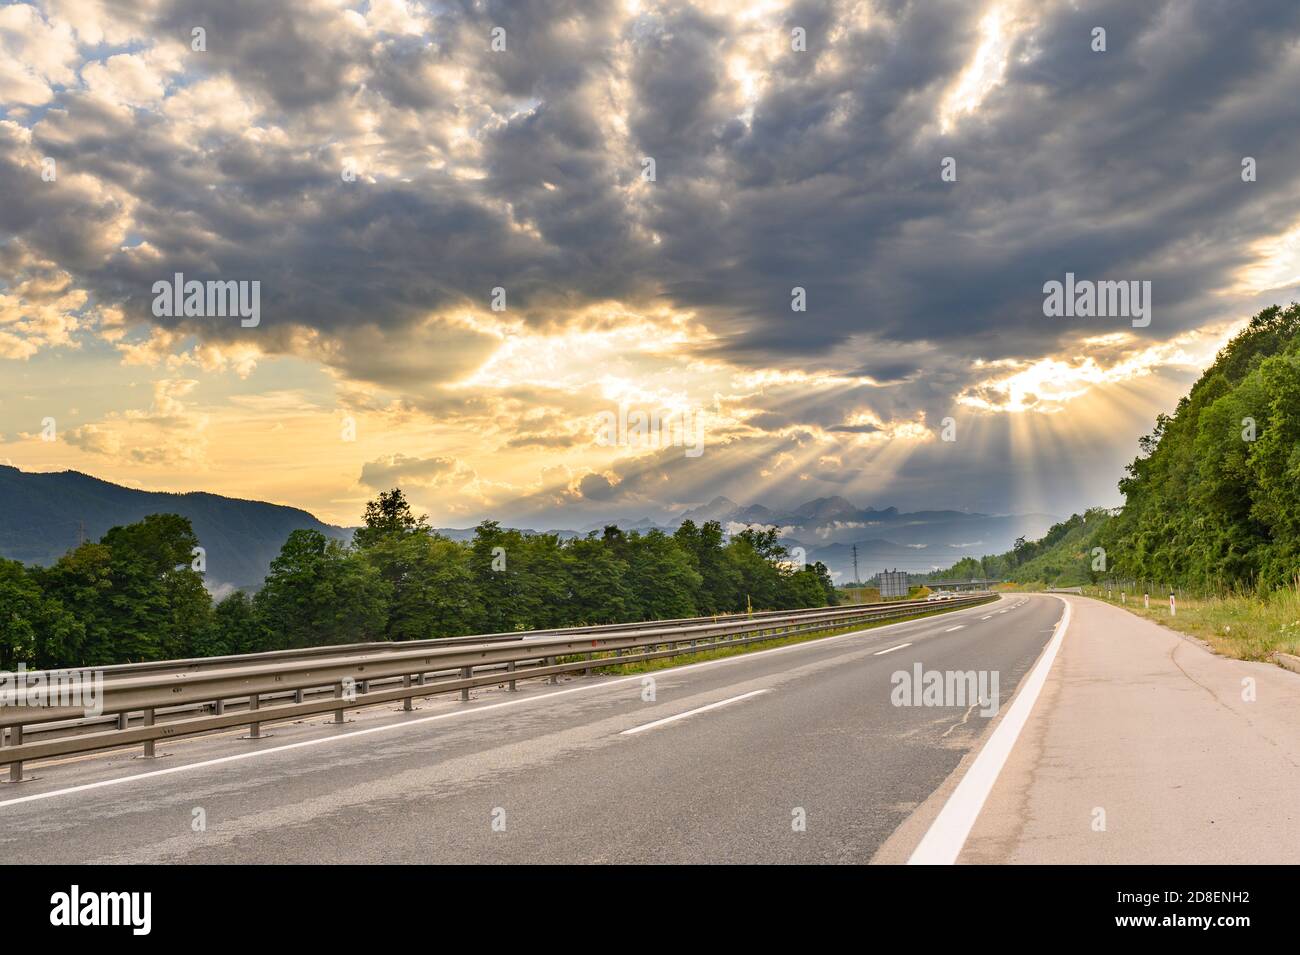 Sinuous Road in Summer Day, sunset scenery Stock Photo